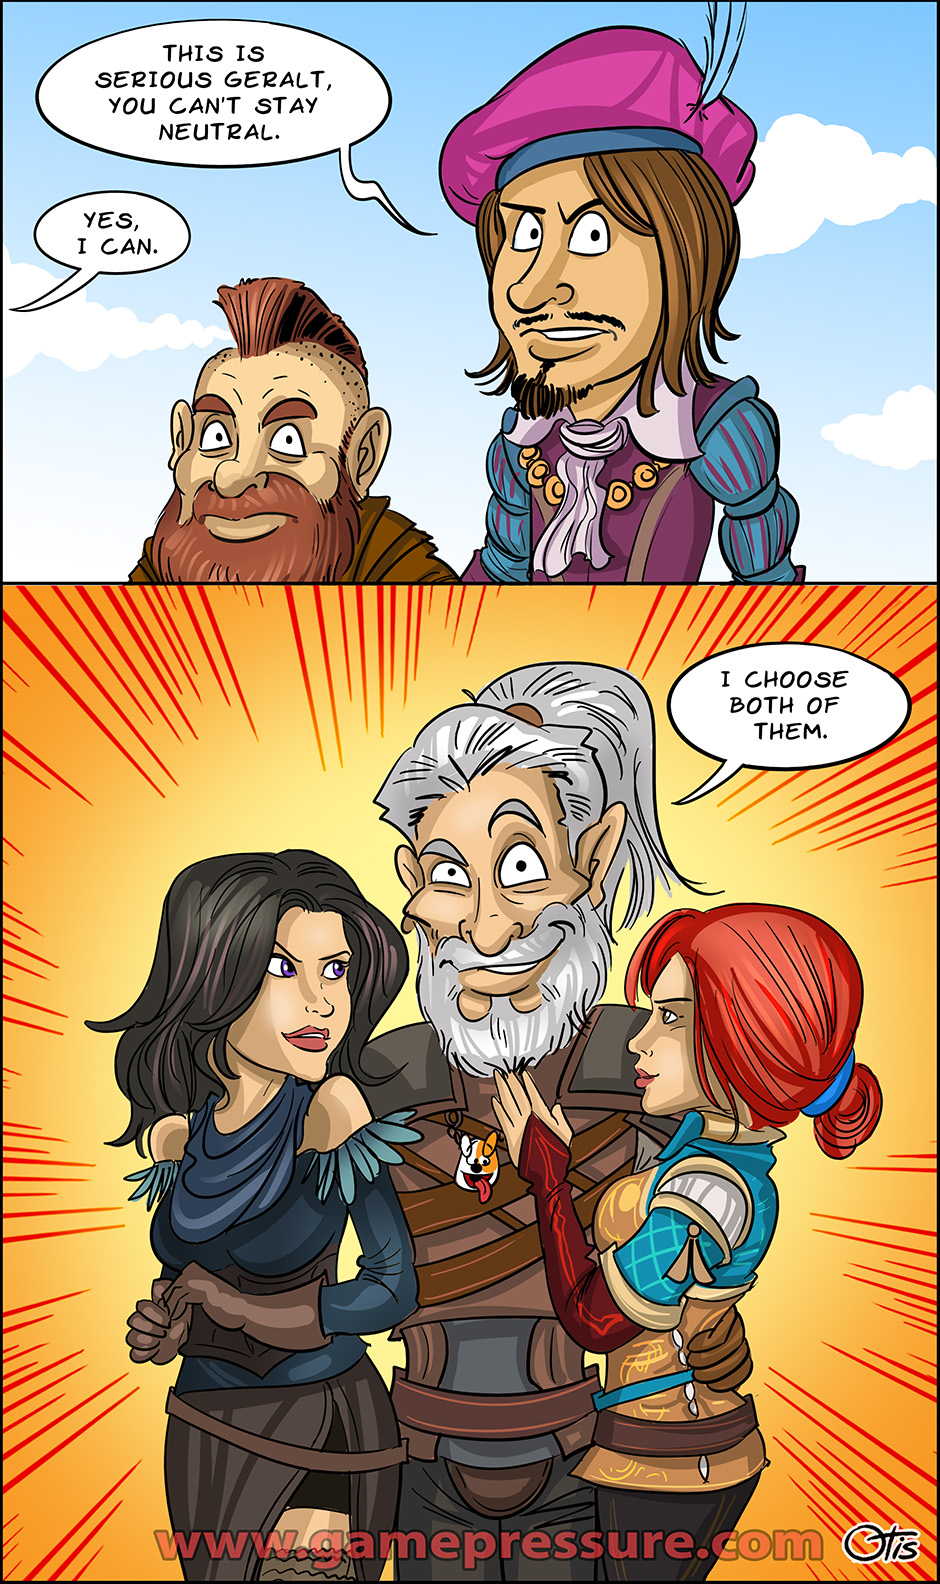 Geralt always stays neutral, comics Cartoon Games, #235. White Wolf is the only witcher who can stay neutral in such cases.